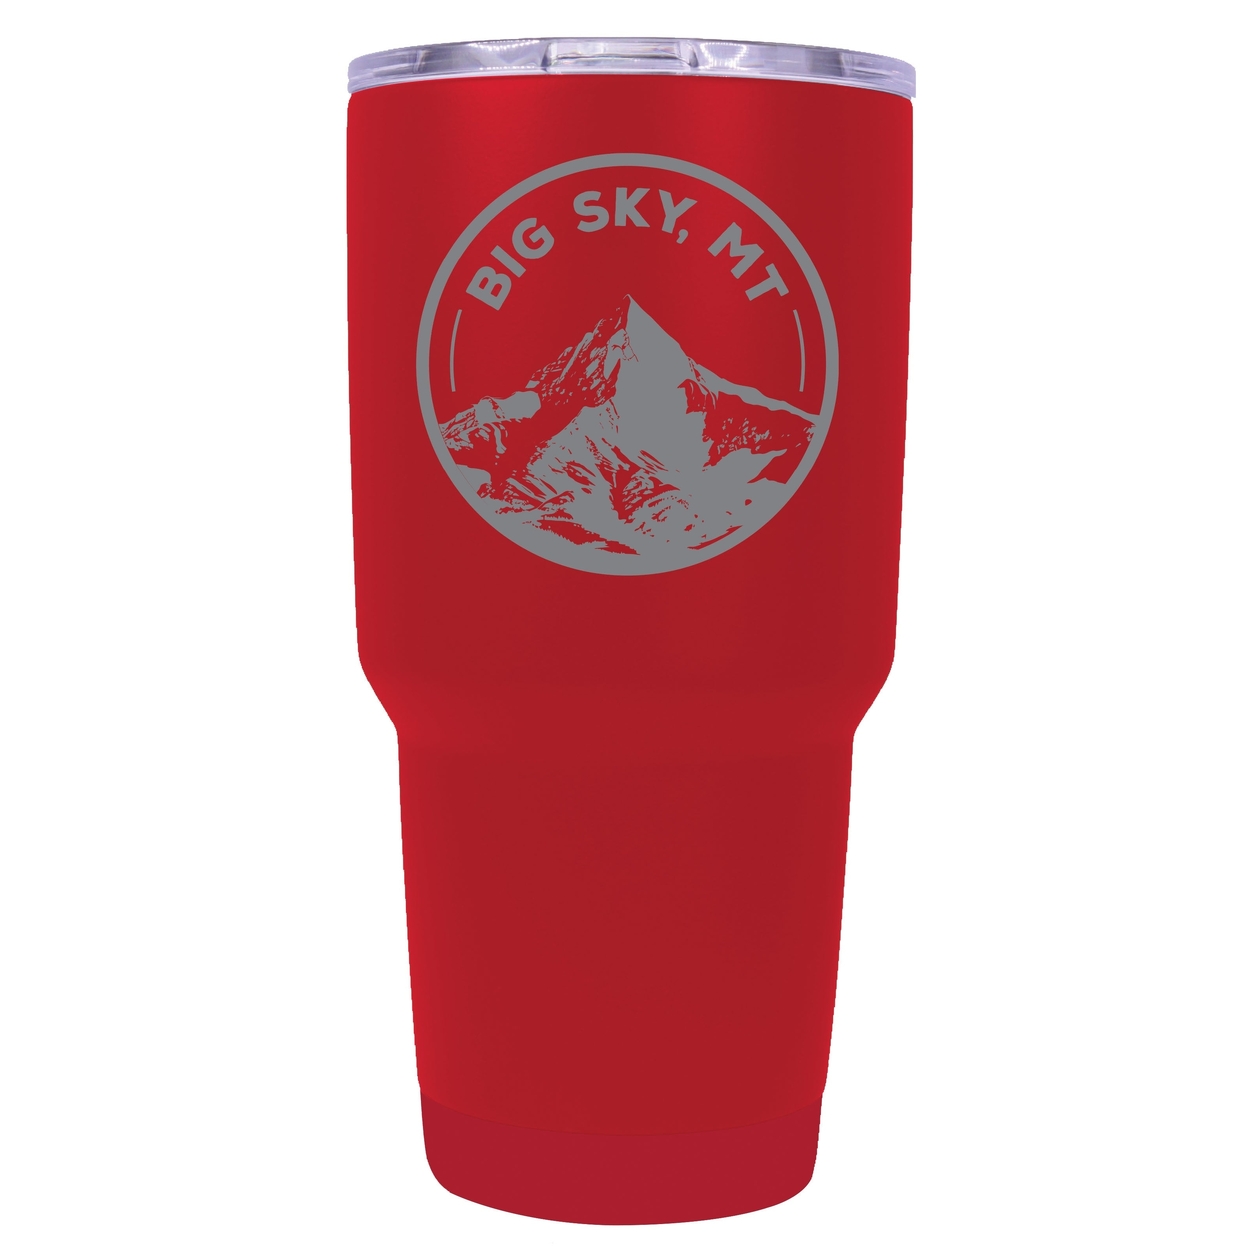 Big Sky Montana Souvenir 24 Oz Engraved Insulated Stainless Steel Tumbler - Seafoam,,4-Pack